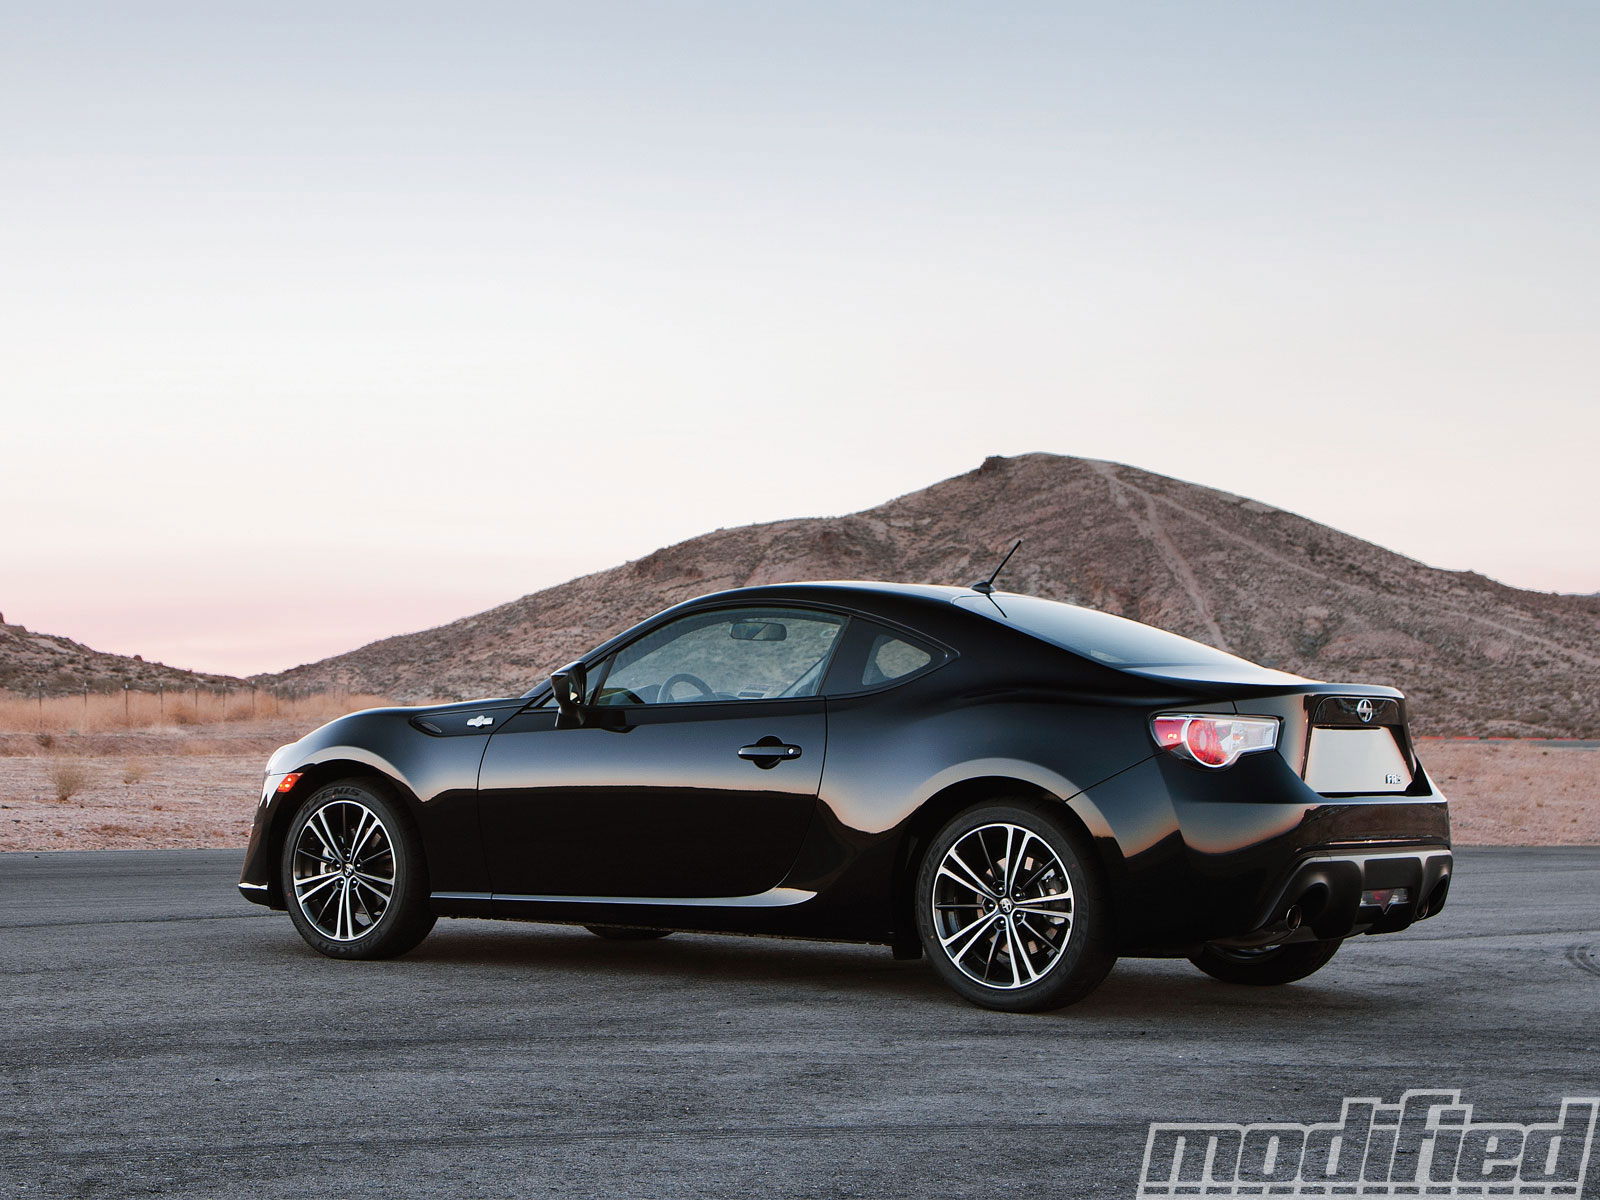 2013 Scion FR-S - Can The Almost Perfect Sports Car Be Improved? - Garage FR -S